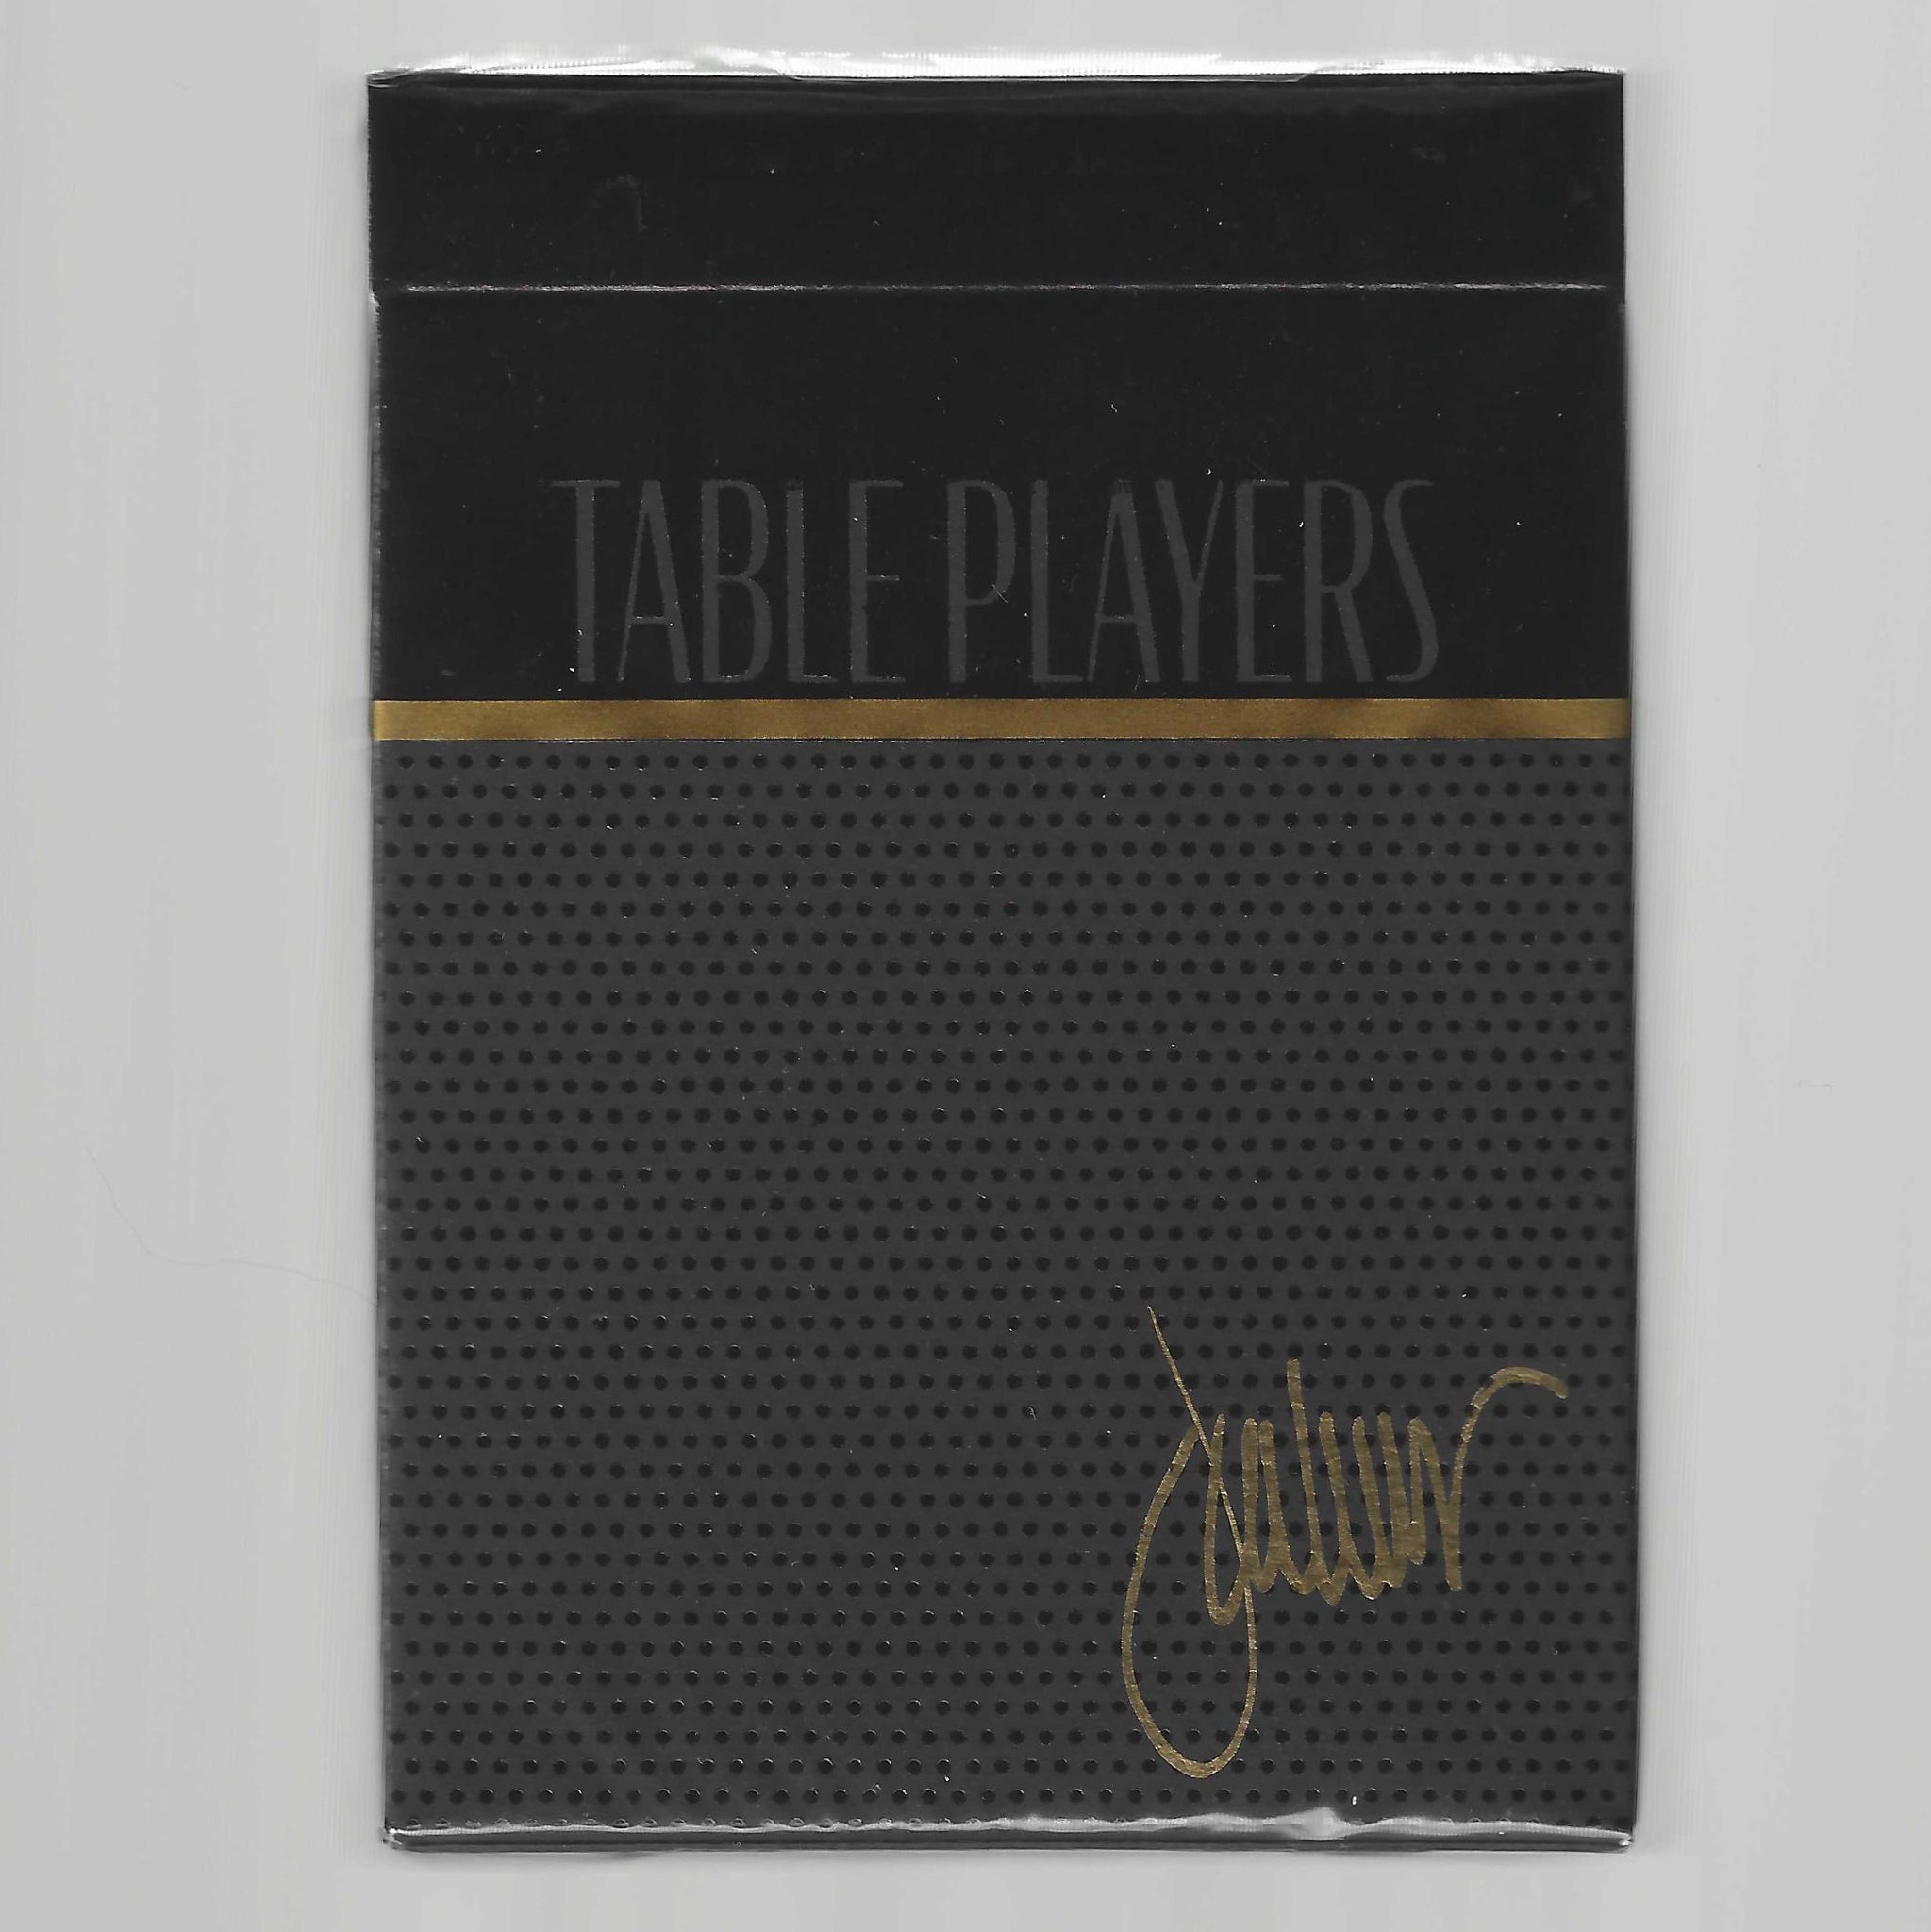 Table Players Vol. 6 (Golden Ticket Edition #17/25) [AUCTION]